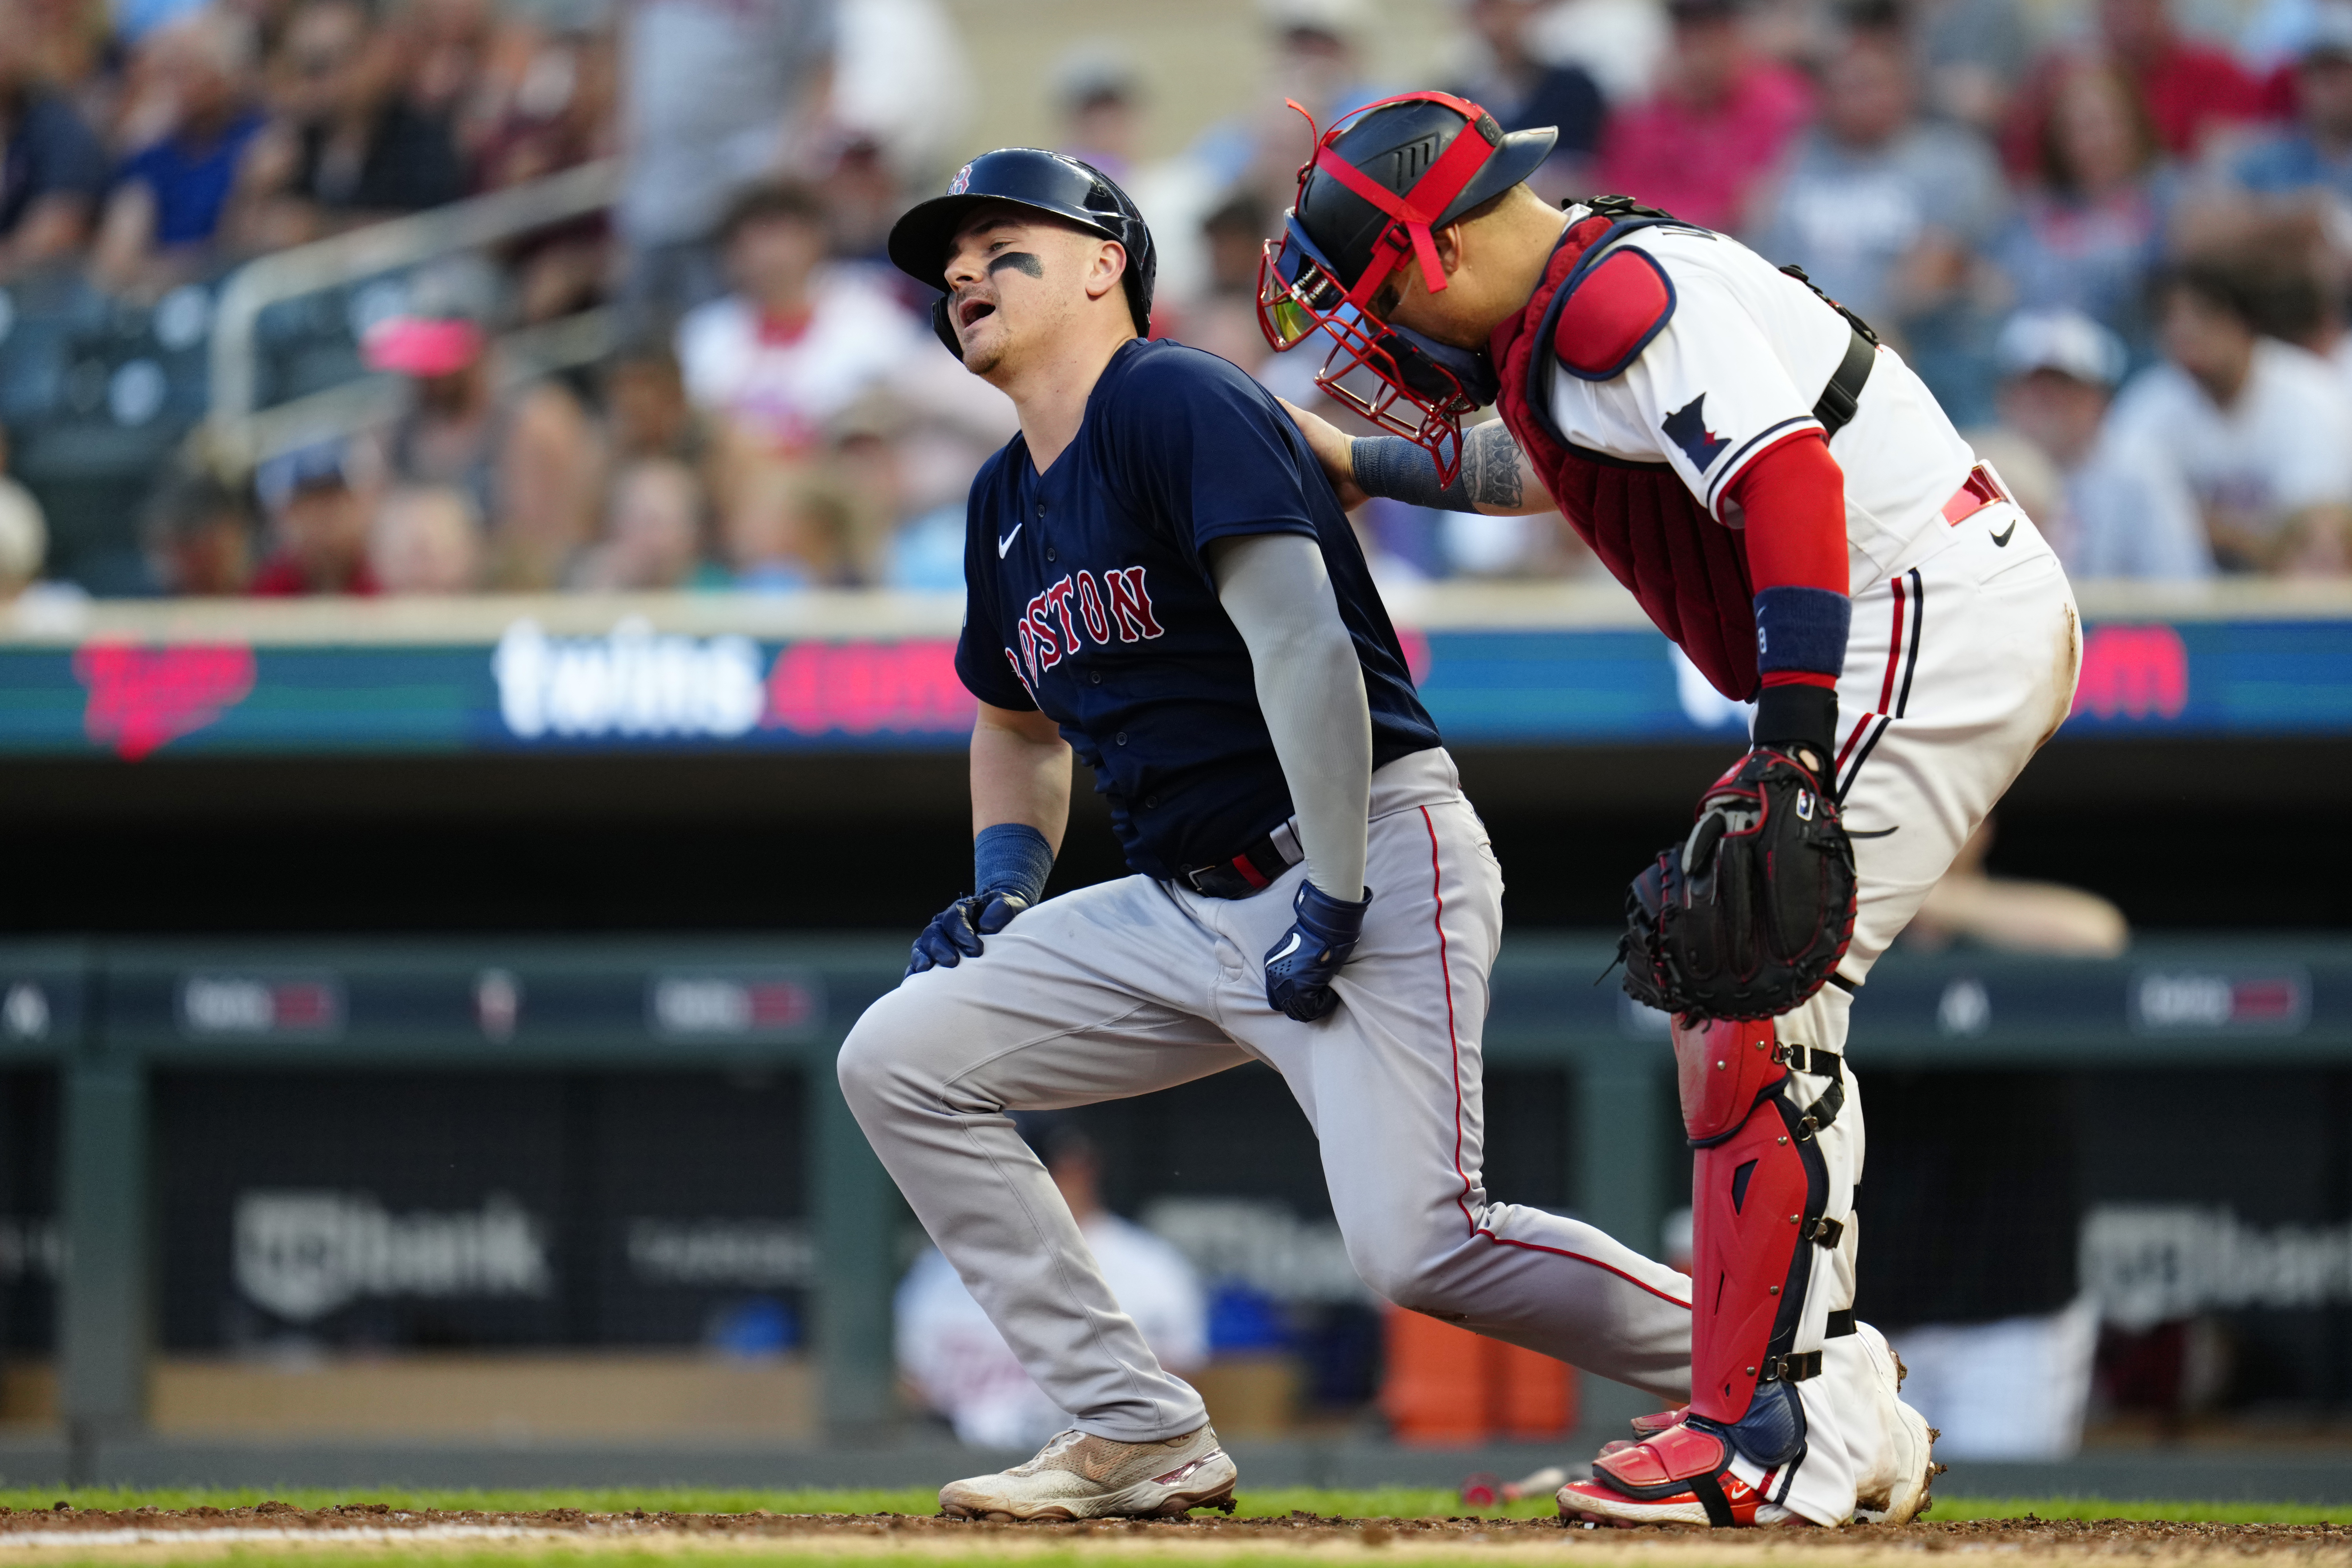 Red-Hot Red Sox Offense Making Up for Run Prevention Woes